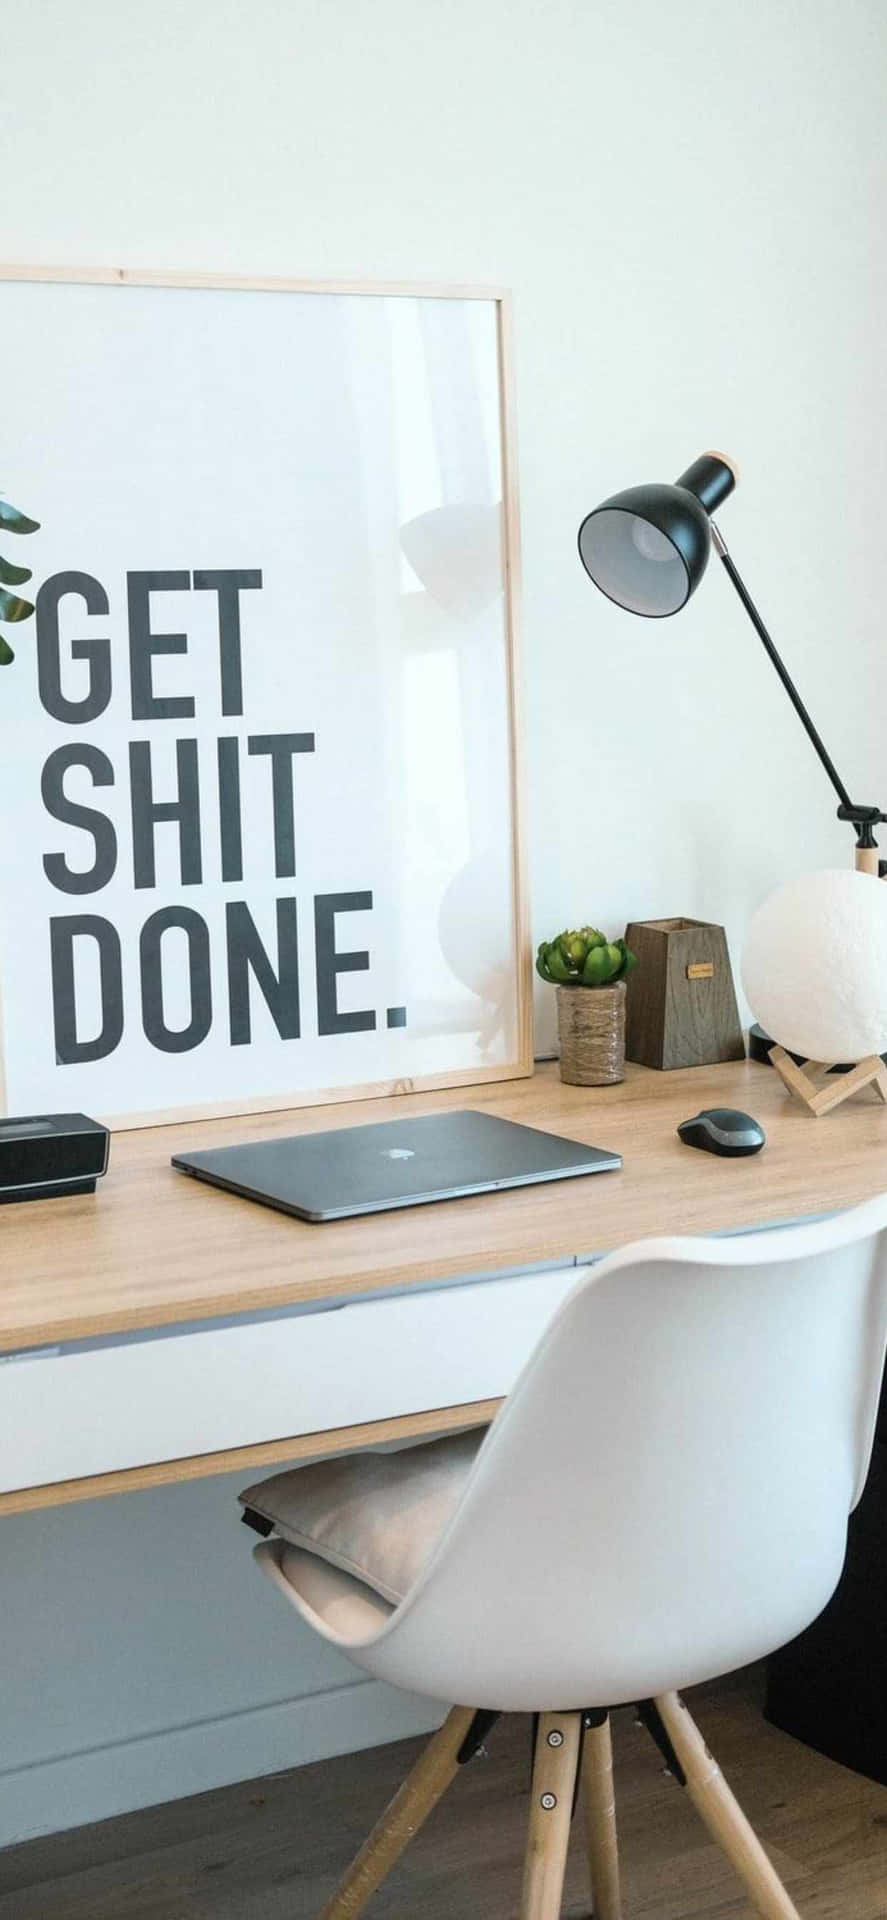 A Desk With A Poster That Says Get Shit Done